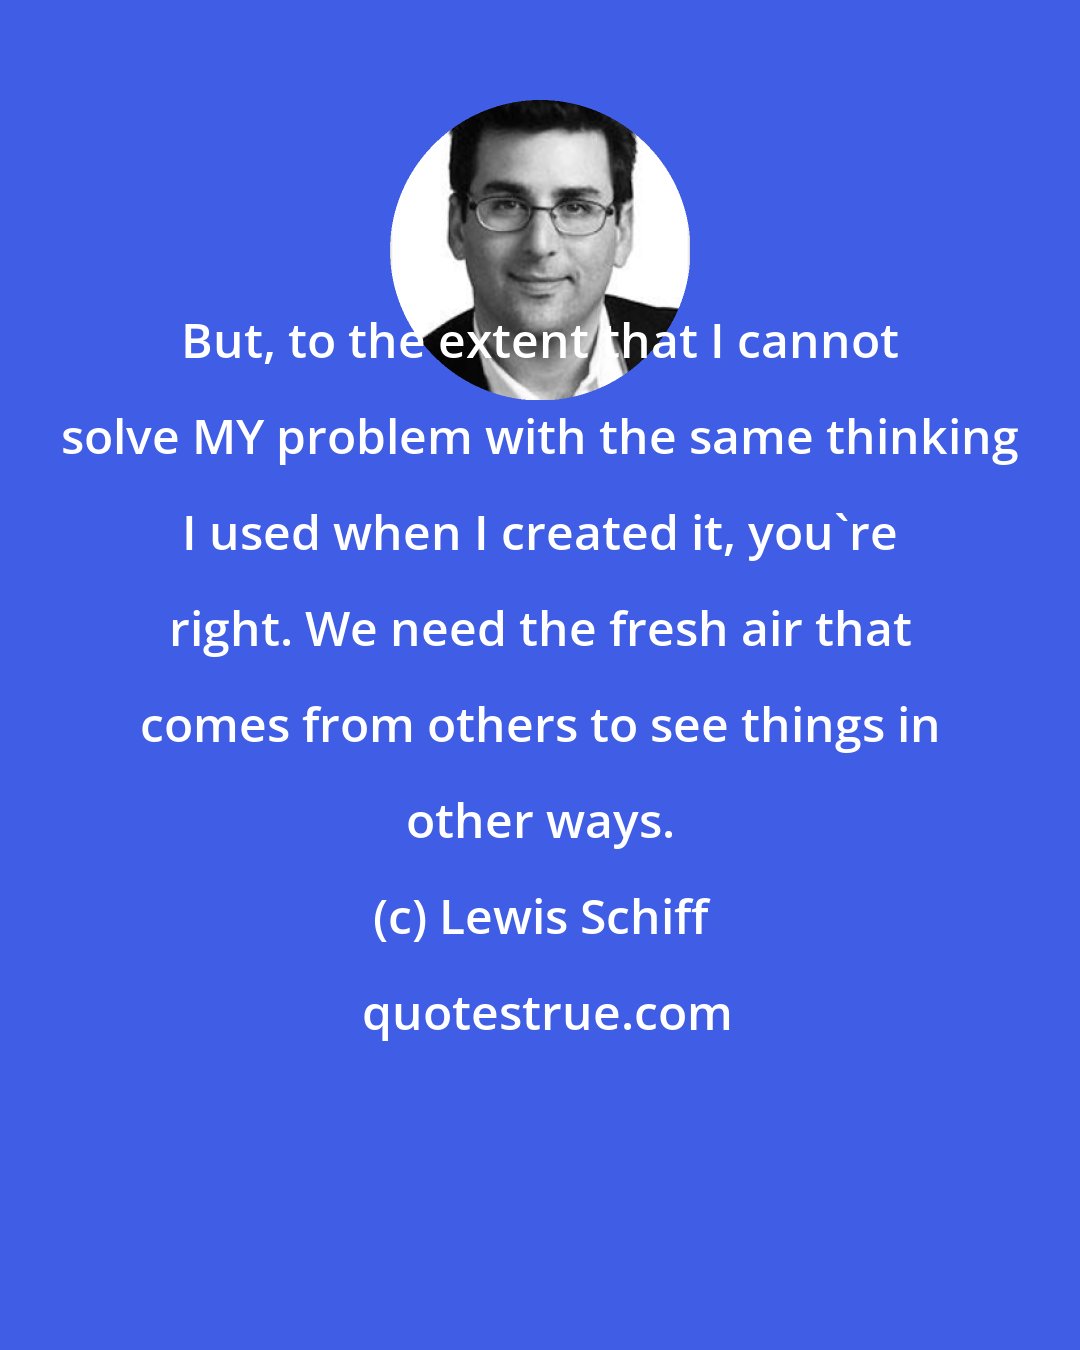 Lewis Schiff: But, to the extent that I cannot solve MY problem with the same thinking I used when I created it, you're right. We need the fresh air that comes from others to see things in other ways.